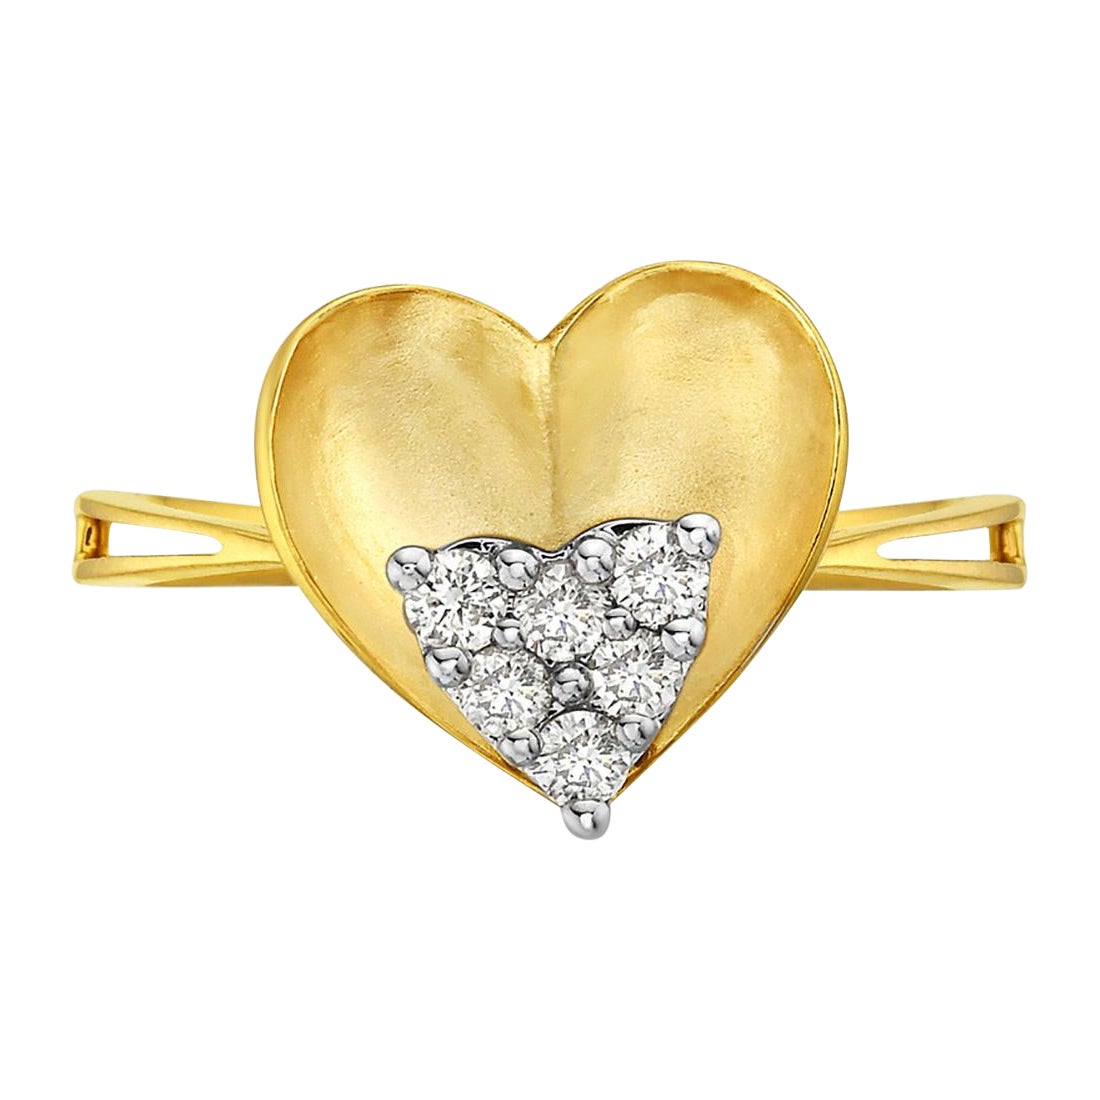 Heart Shape 14k Yellow Gold Classic Ring Equipped with Diamonds in the Center For Sale